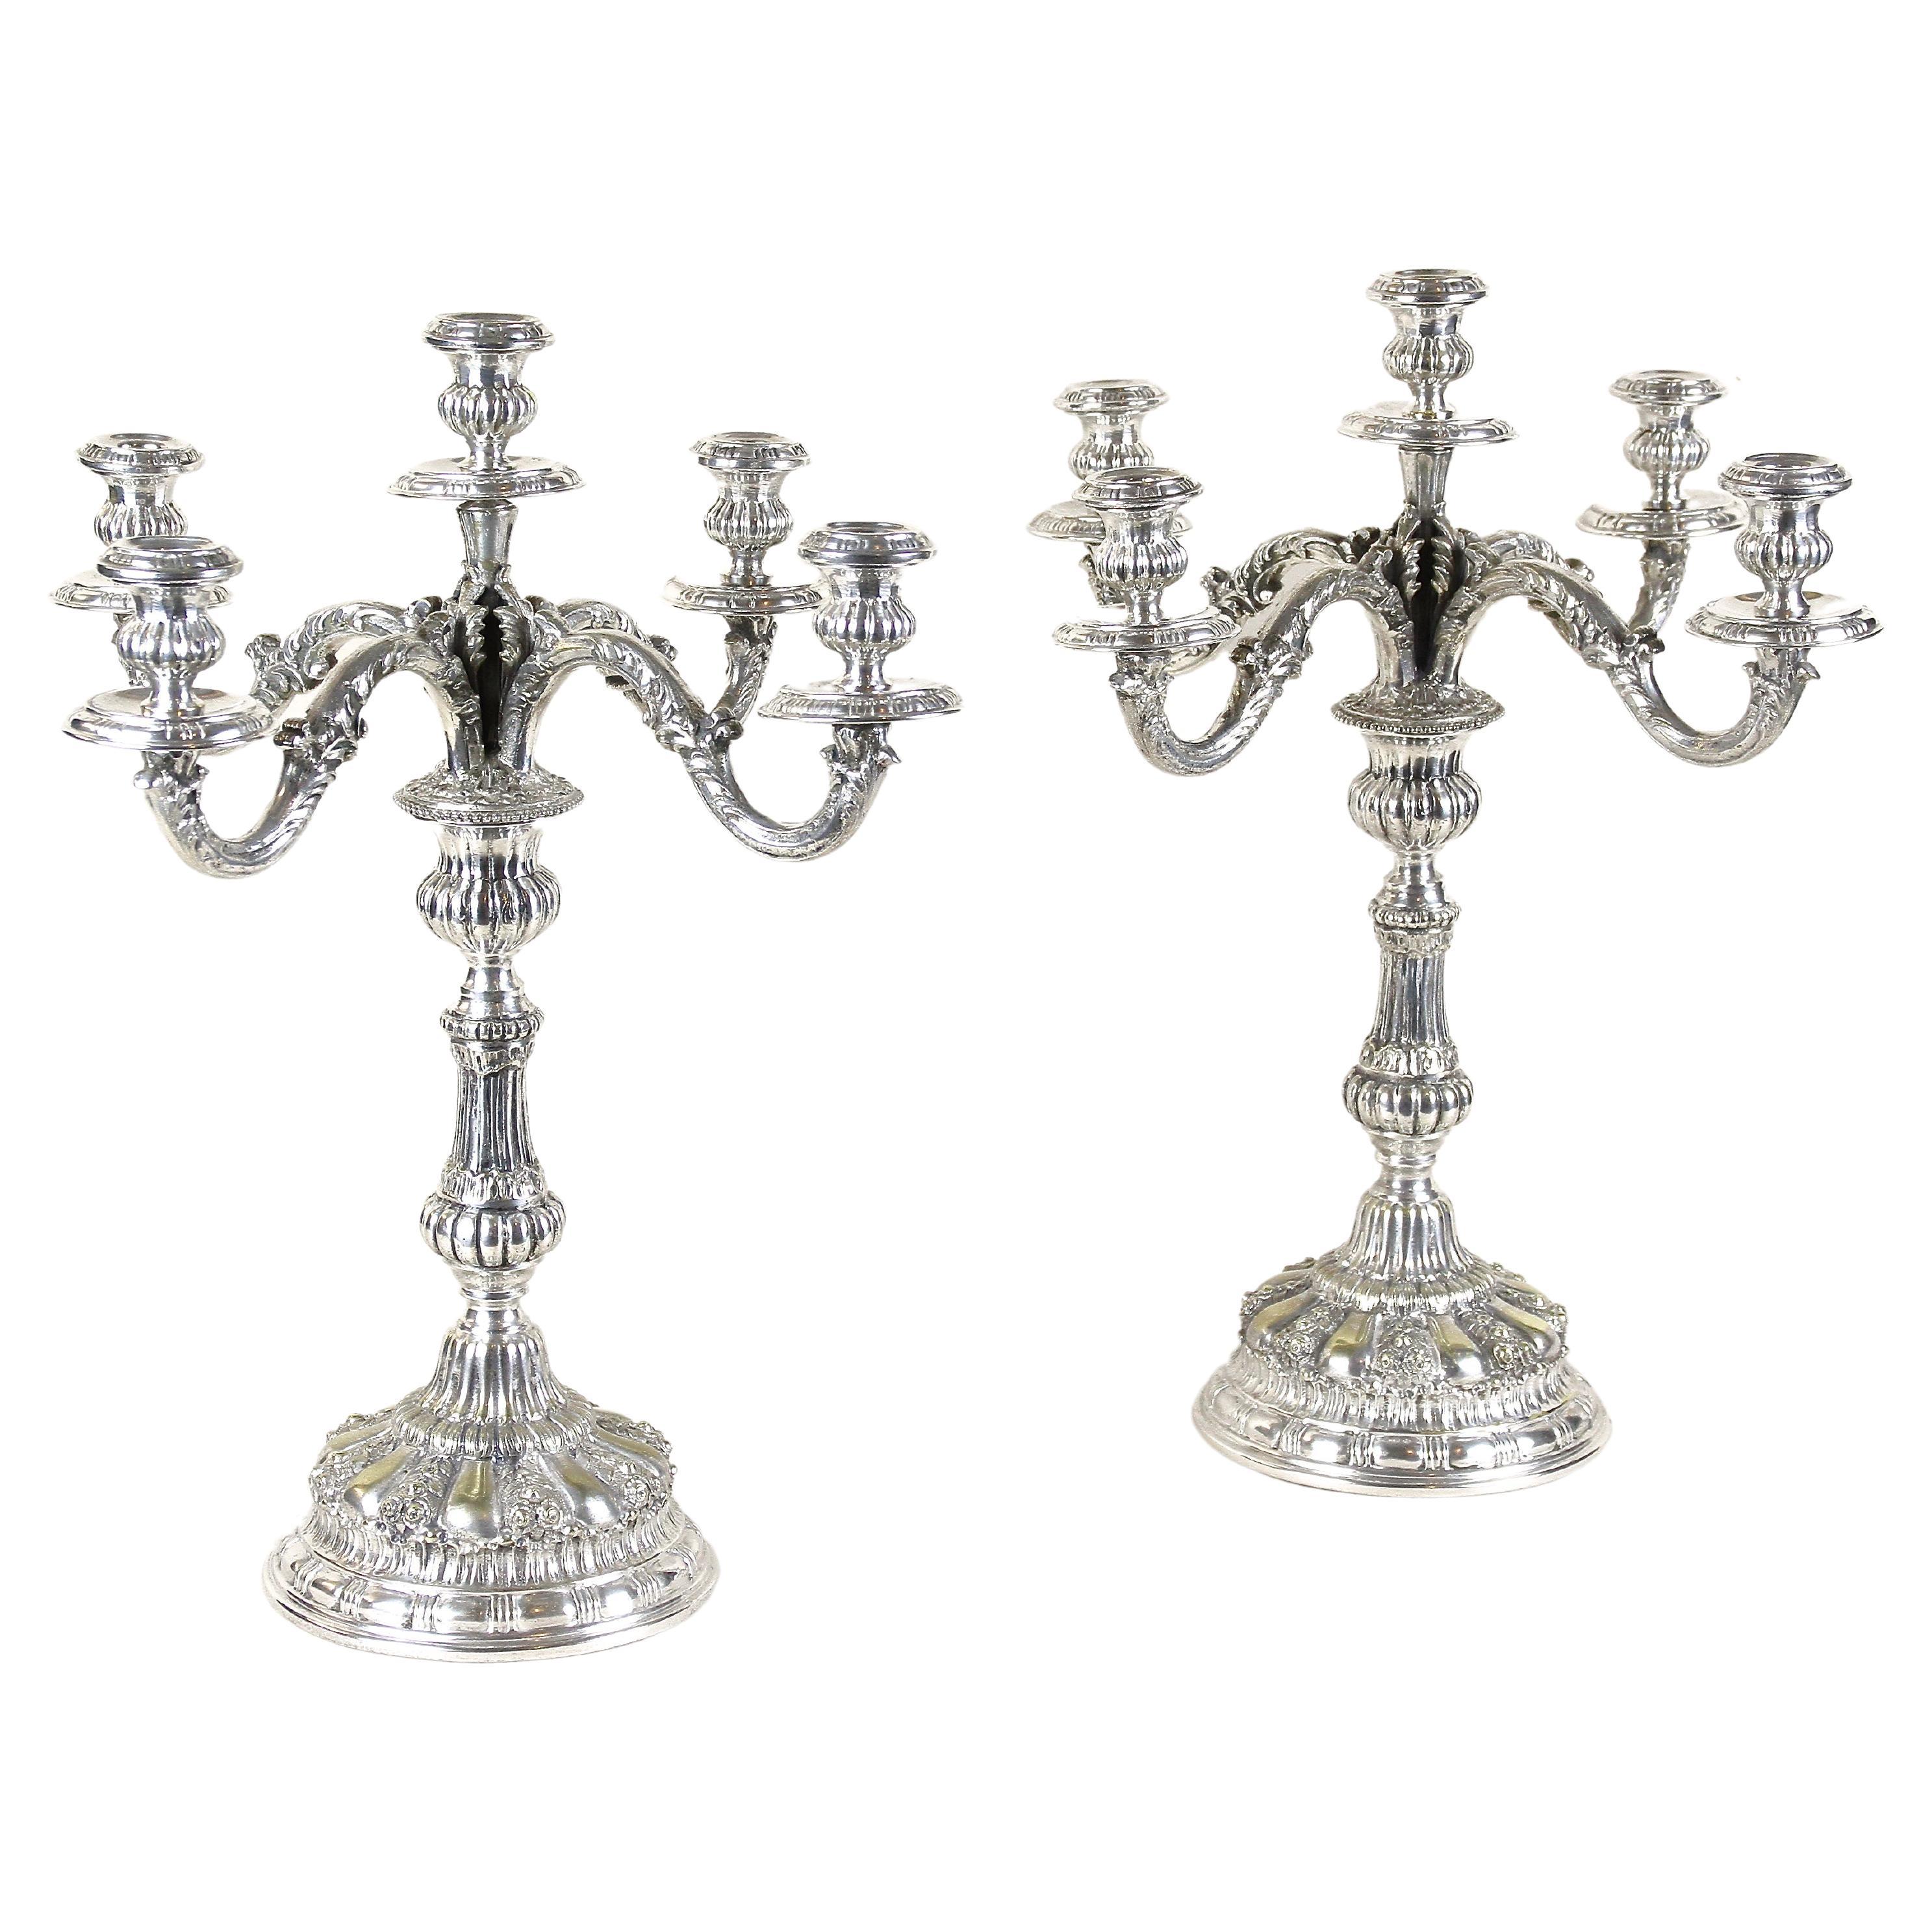 Pair of 19th Century Silvered Candelabras 5-Armed, Austria, circa 1860 For Sale